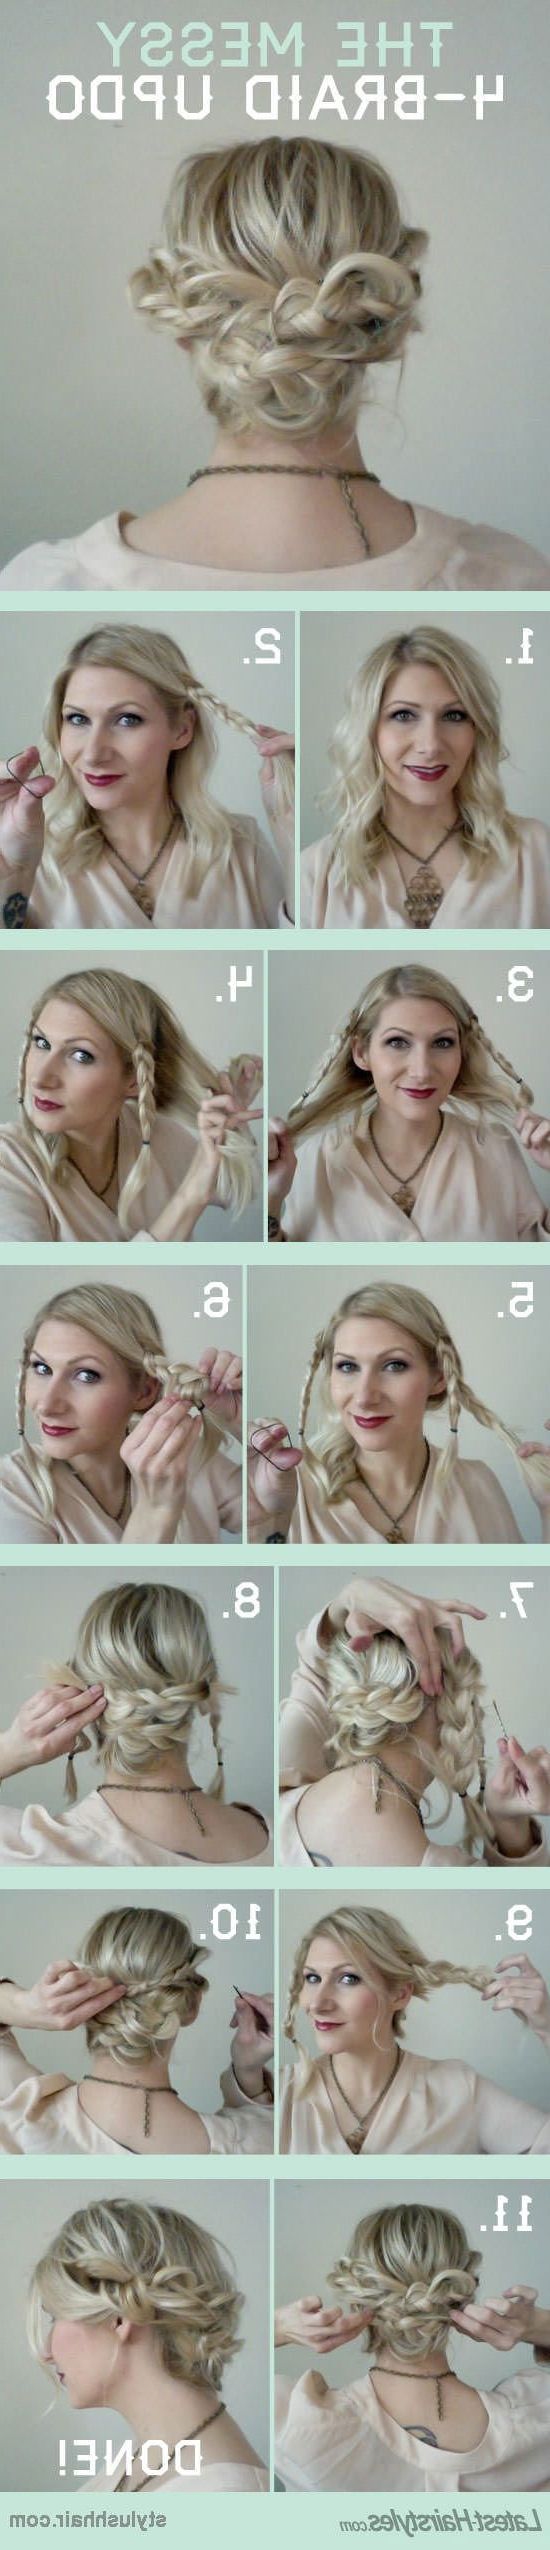 15 Cute And Easy Hairstyle Tutorials For Medium Length Hair – Gurl With Regard To Cool Updos For Medium Length Hair (View 8 of 15)